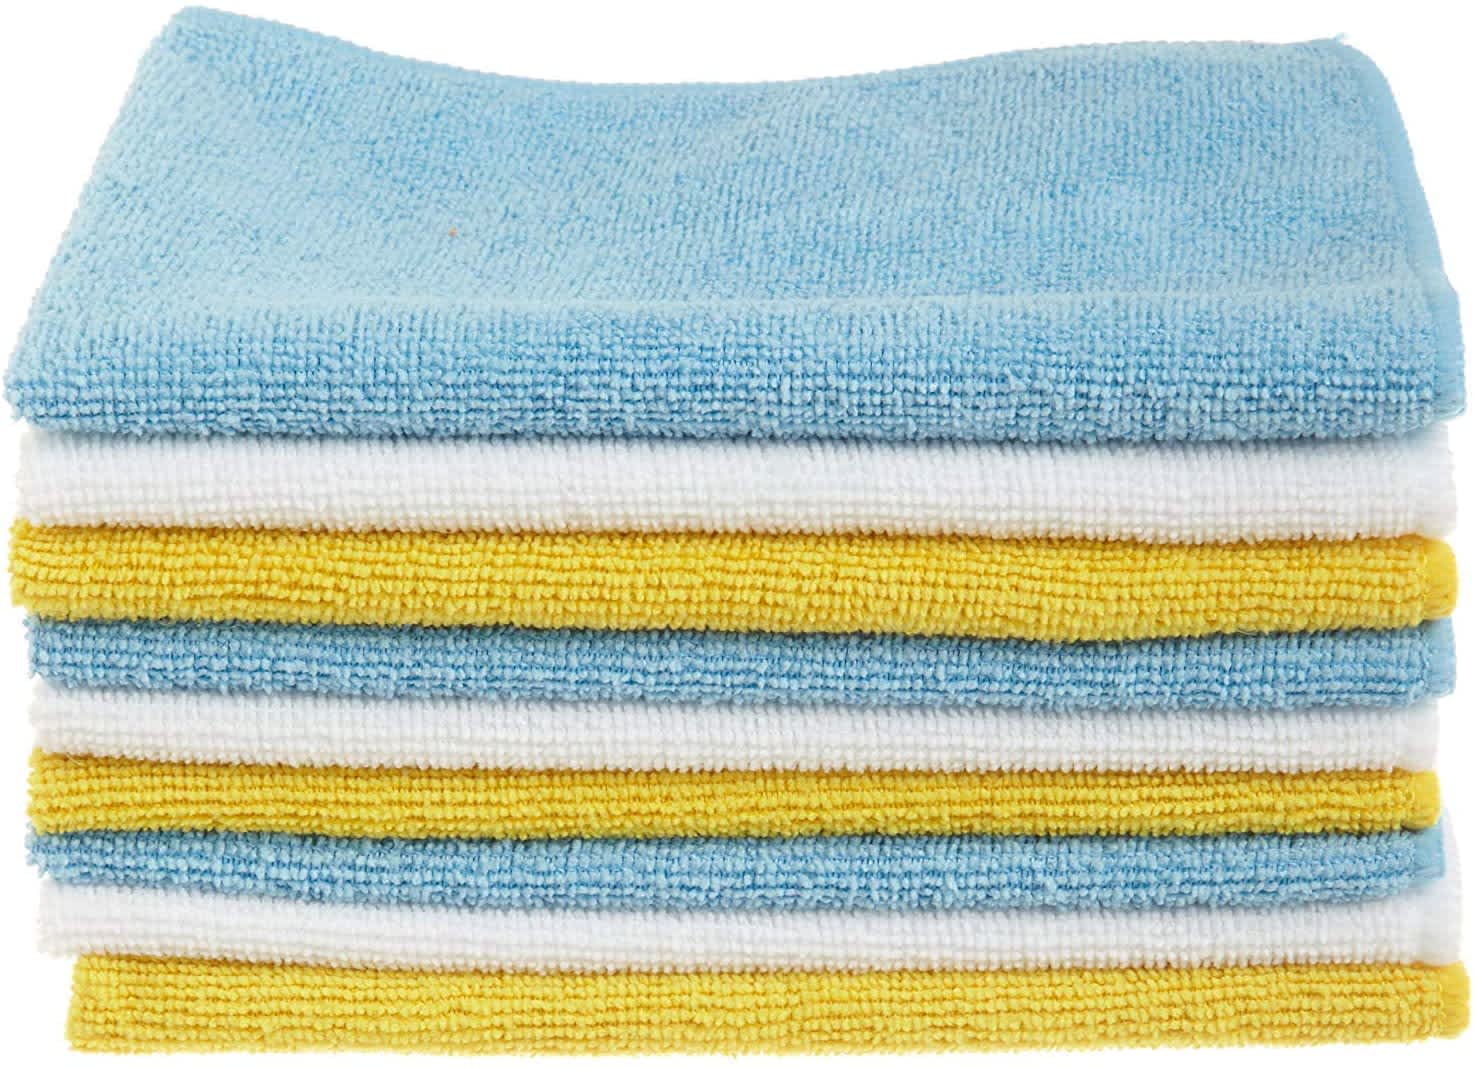 Microfibre Cleaning Towel Review